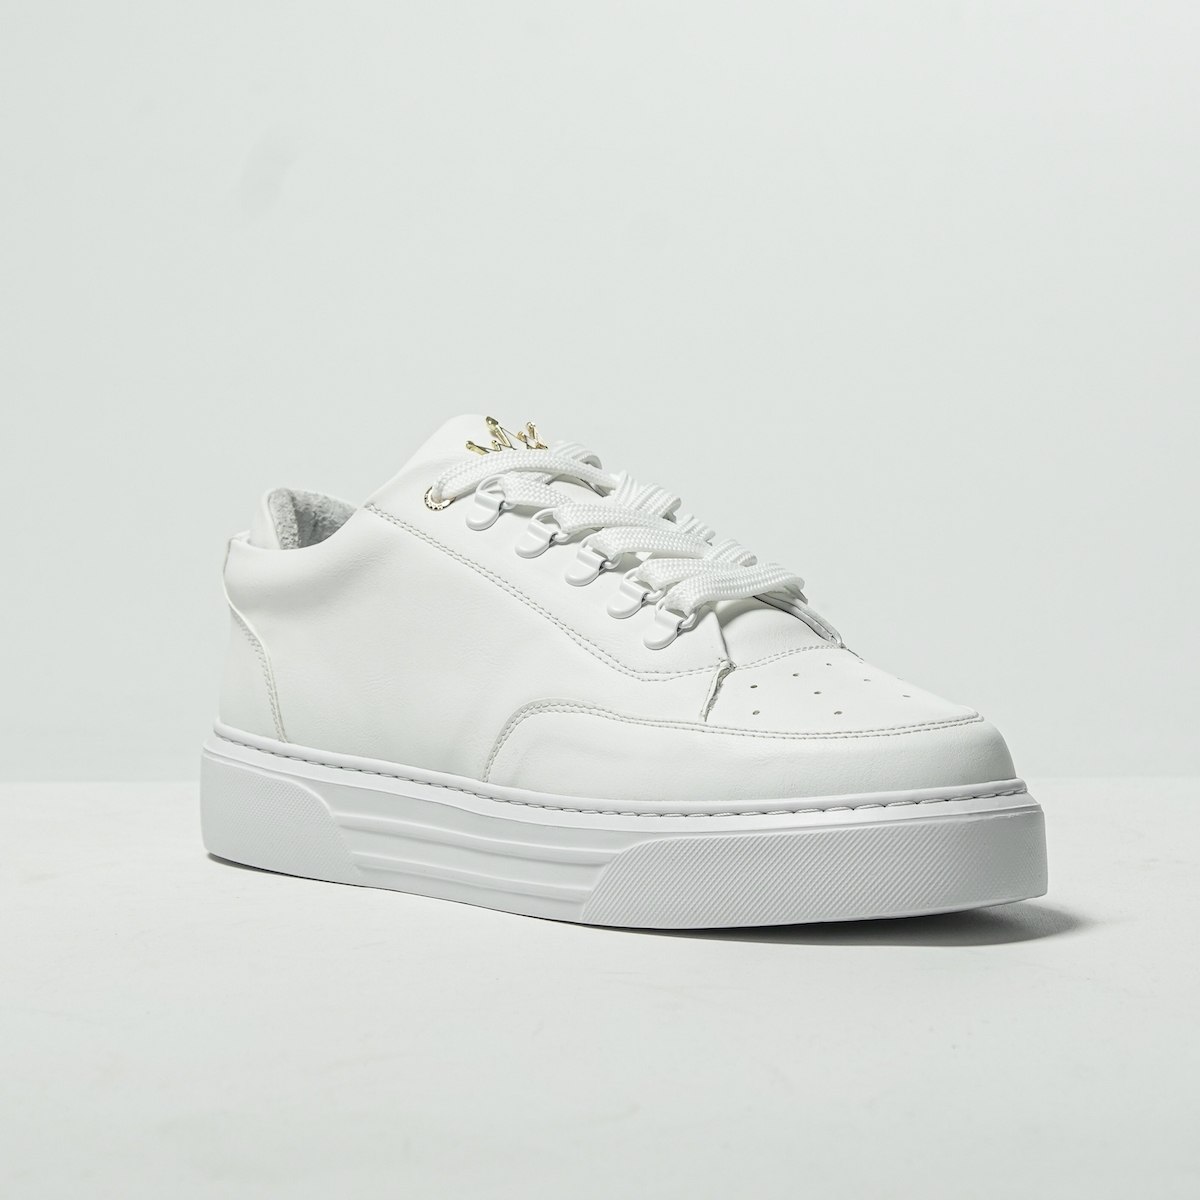 Men's Low Top Sneakers Crowned Shoes White | Martin Valen